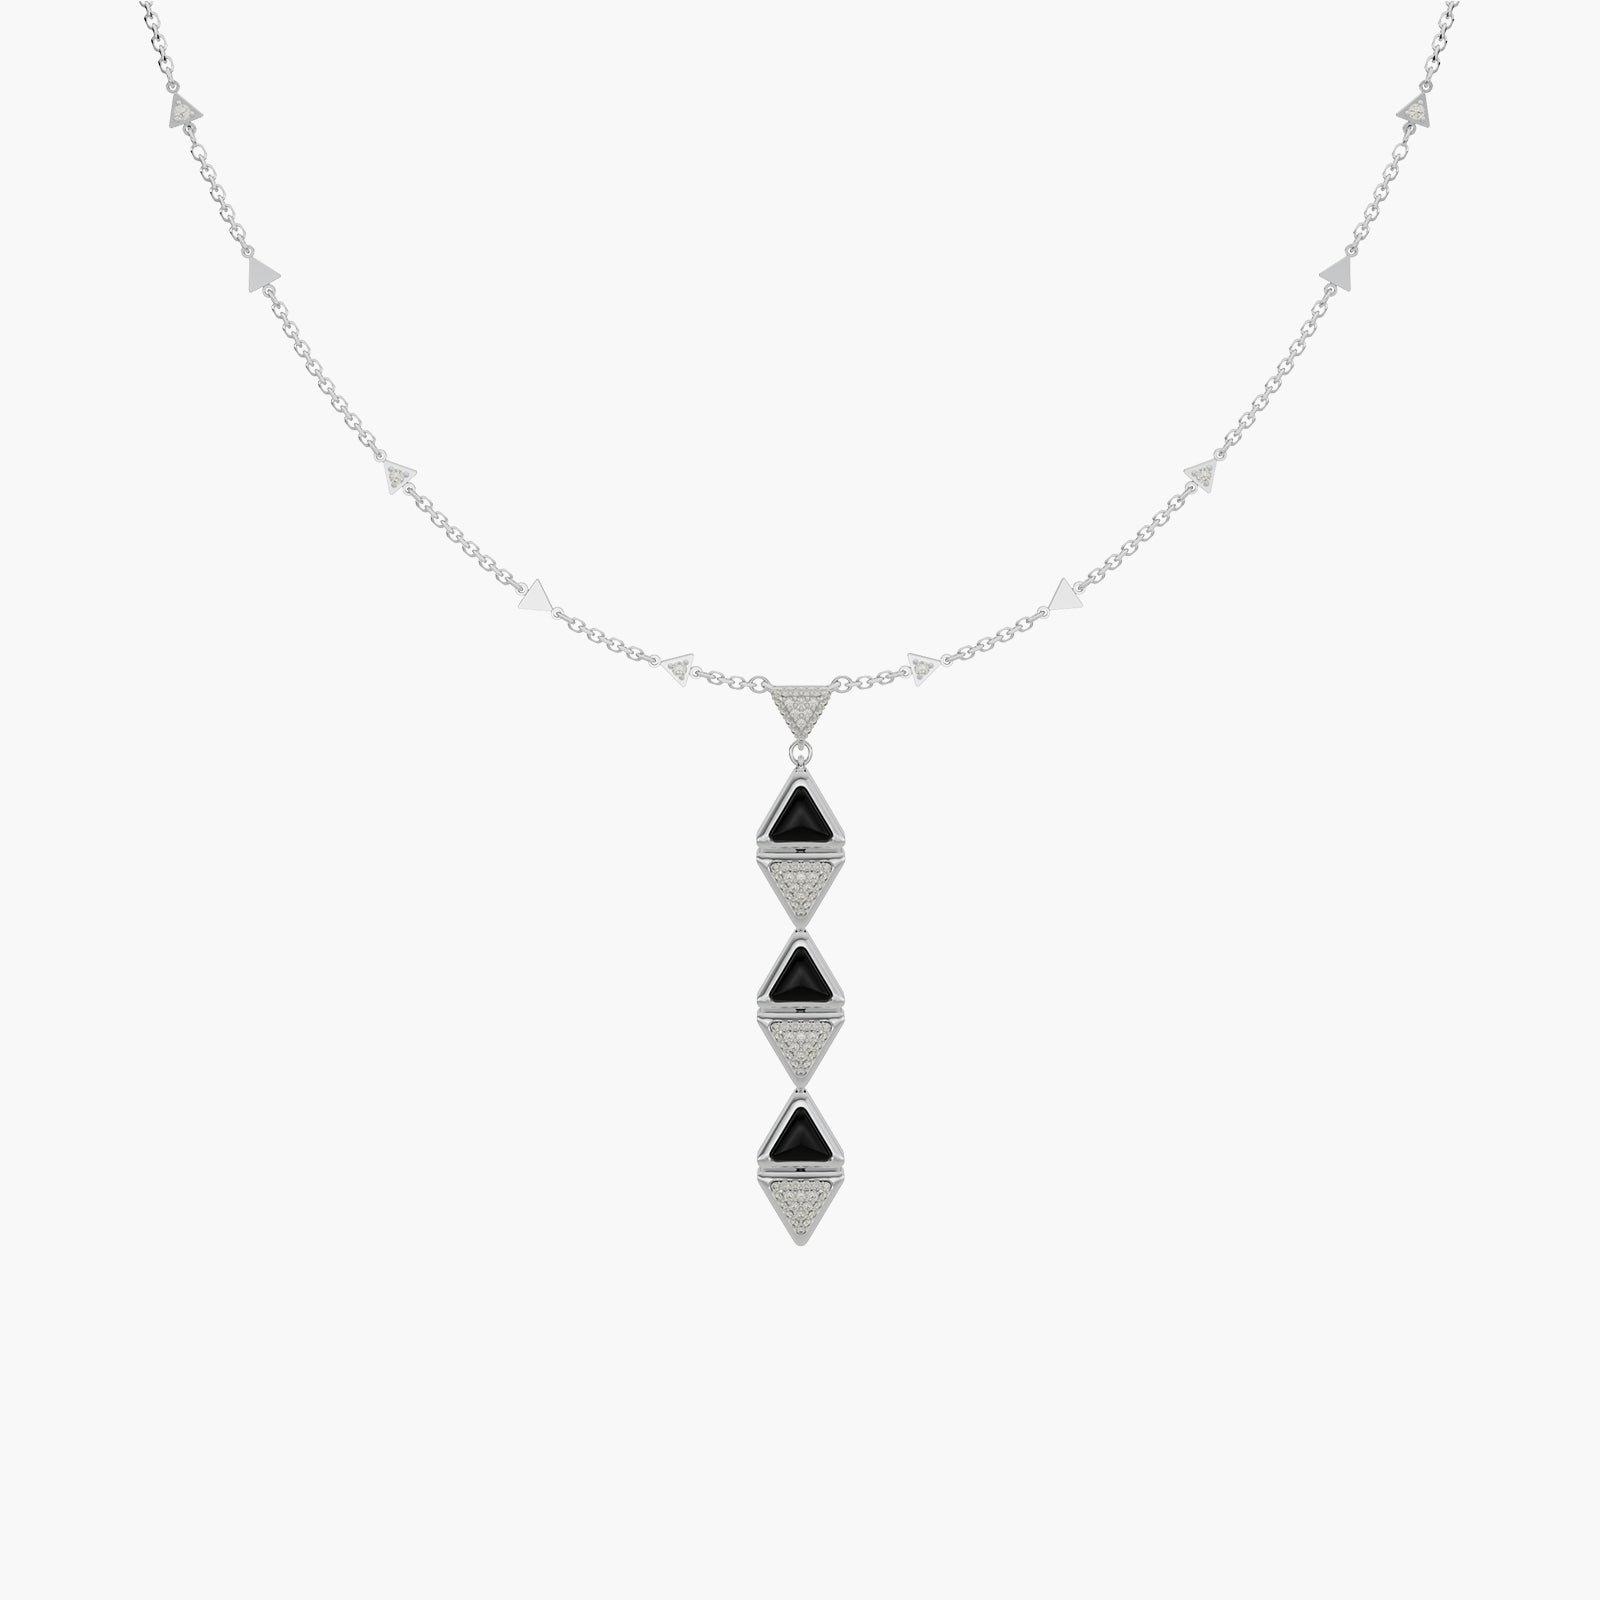 Necklace One Mirror Exquisite White Gold Onix and Diamonds